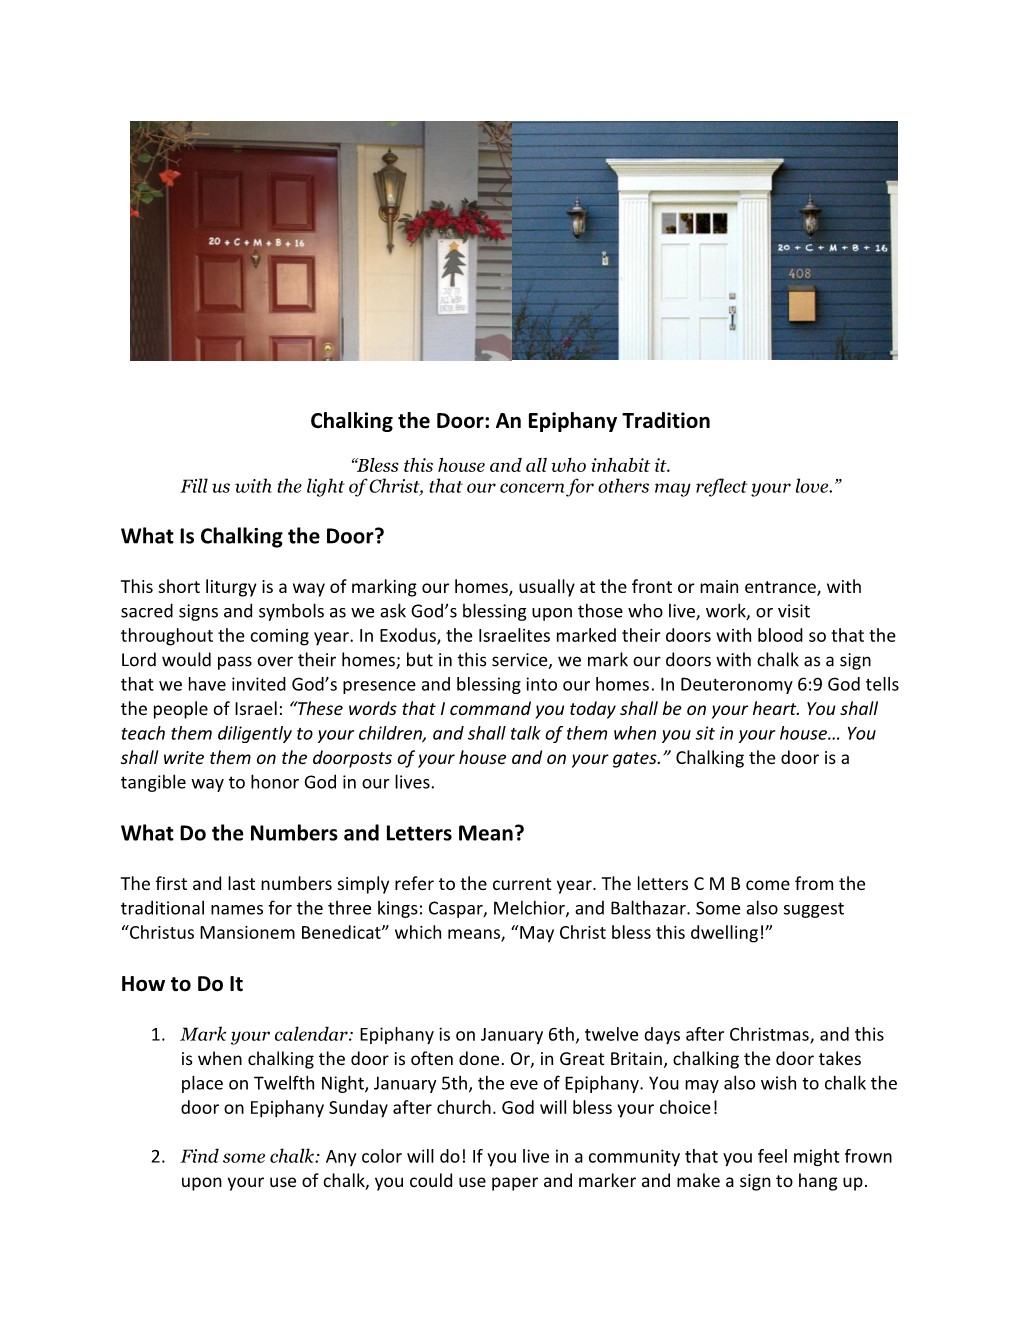 Chalking the Door: an Epiphany Tradition What Is Chalking the Door